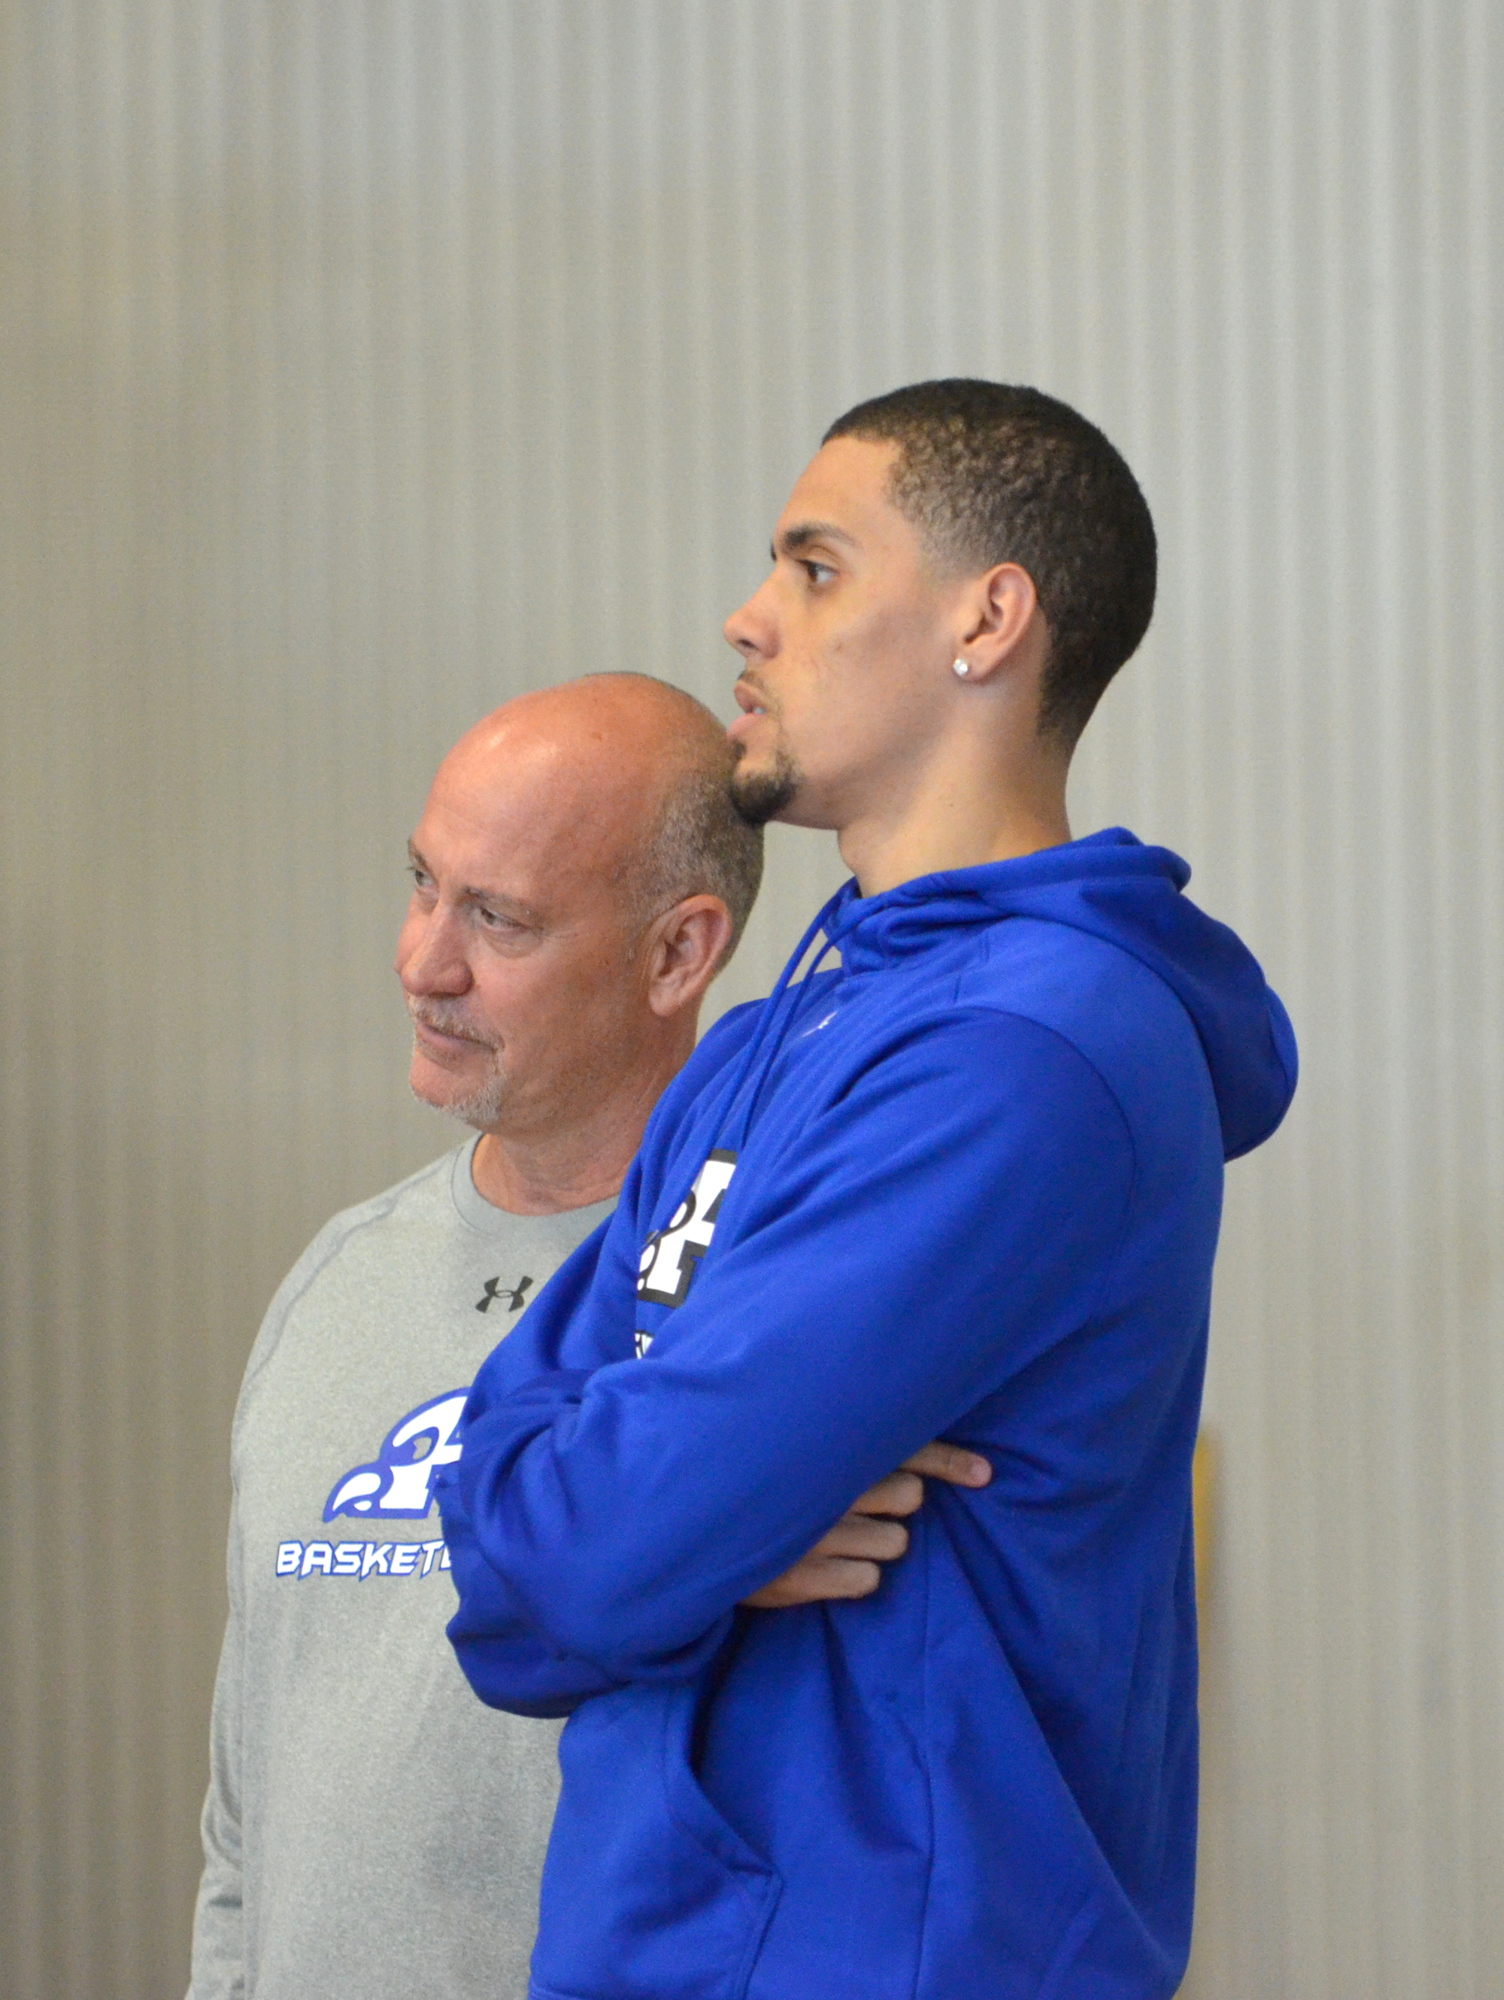 Mark and Trey Griseck scout a game during the Metro vs. Florida Challenge.